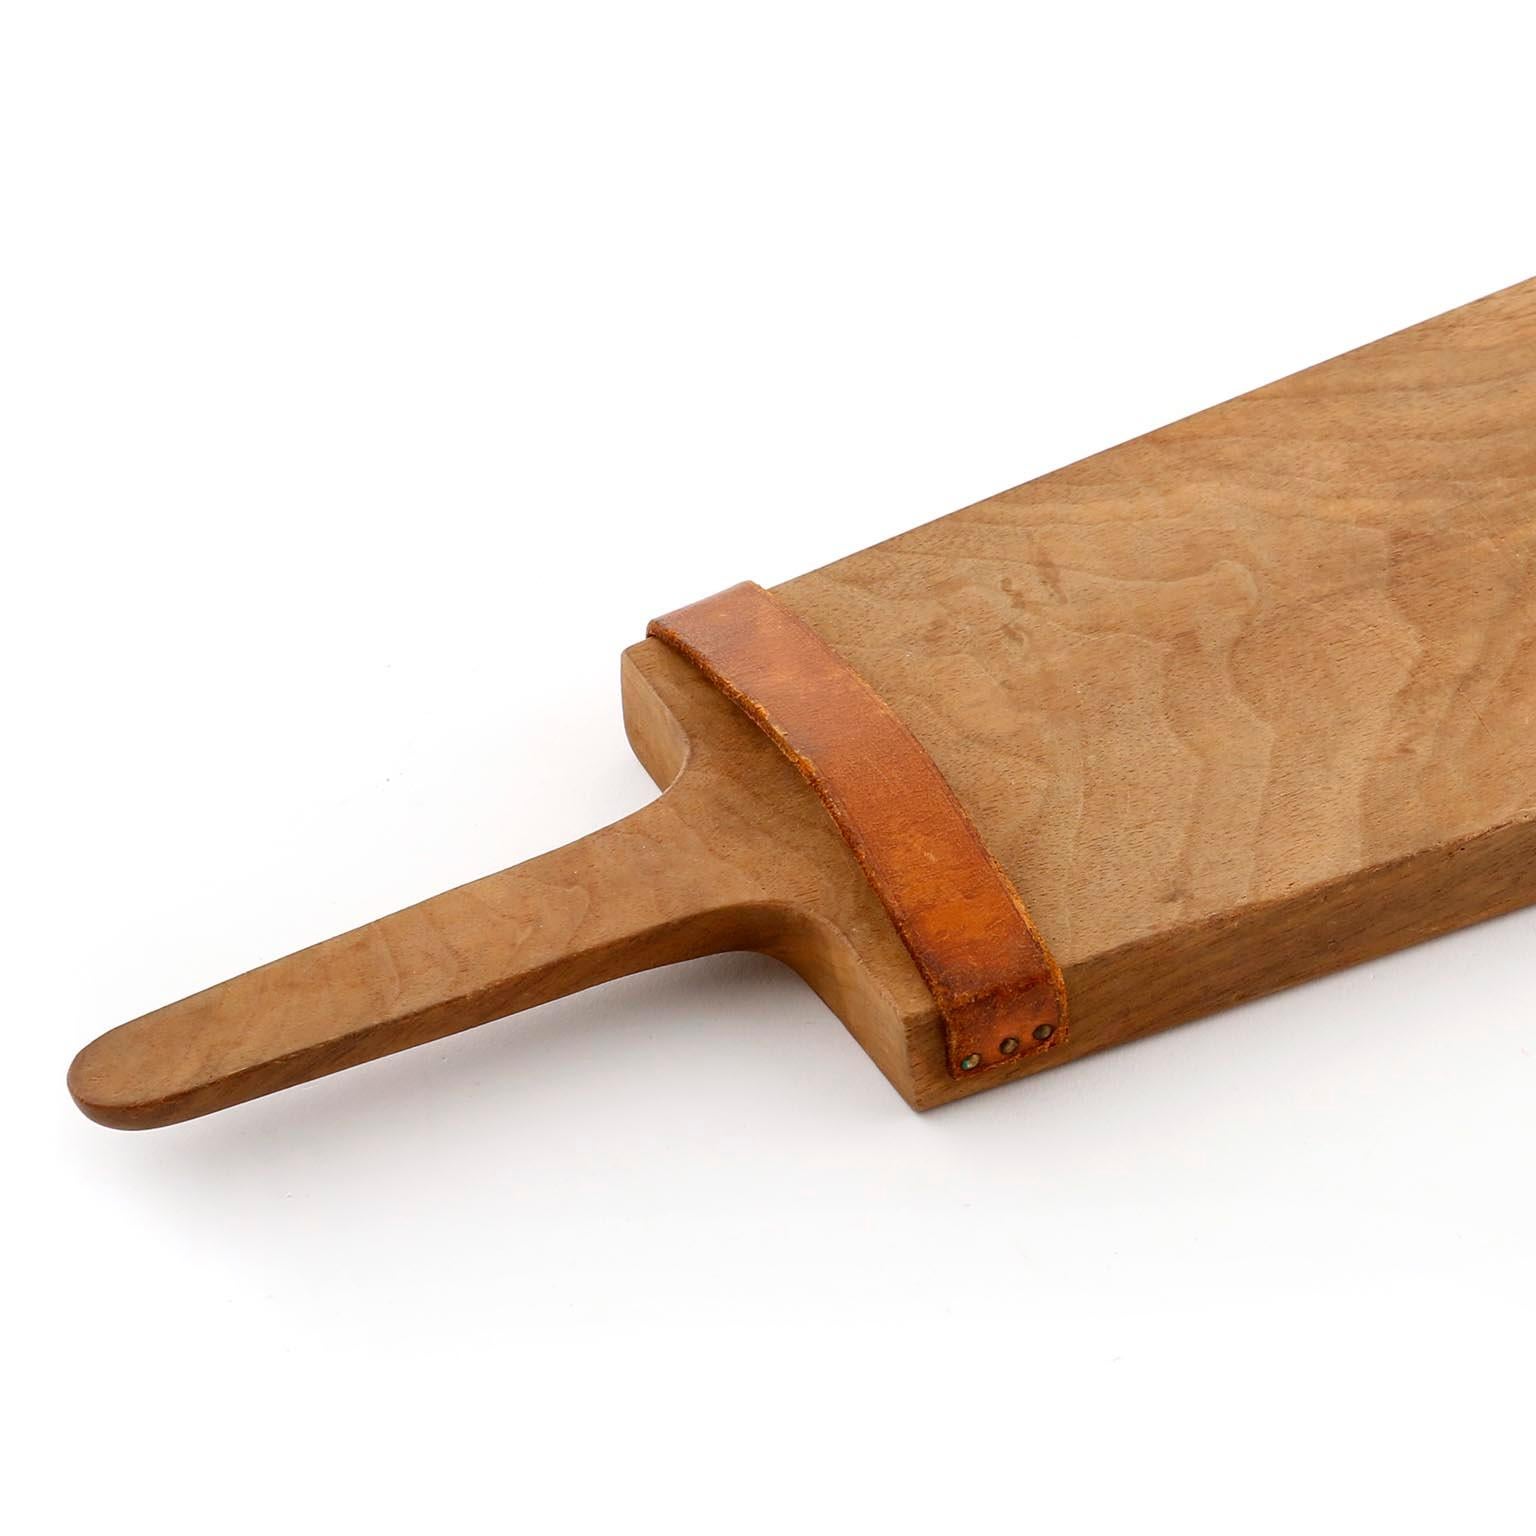 Mid-20th Century Carl Auböck Knife Cutting Chopping Board, Wood Wicker Stainless Steel, 1950s For Sale